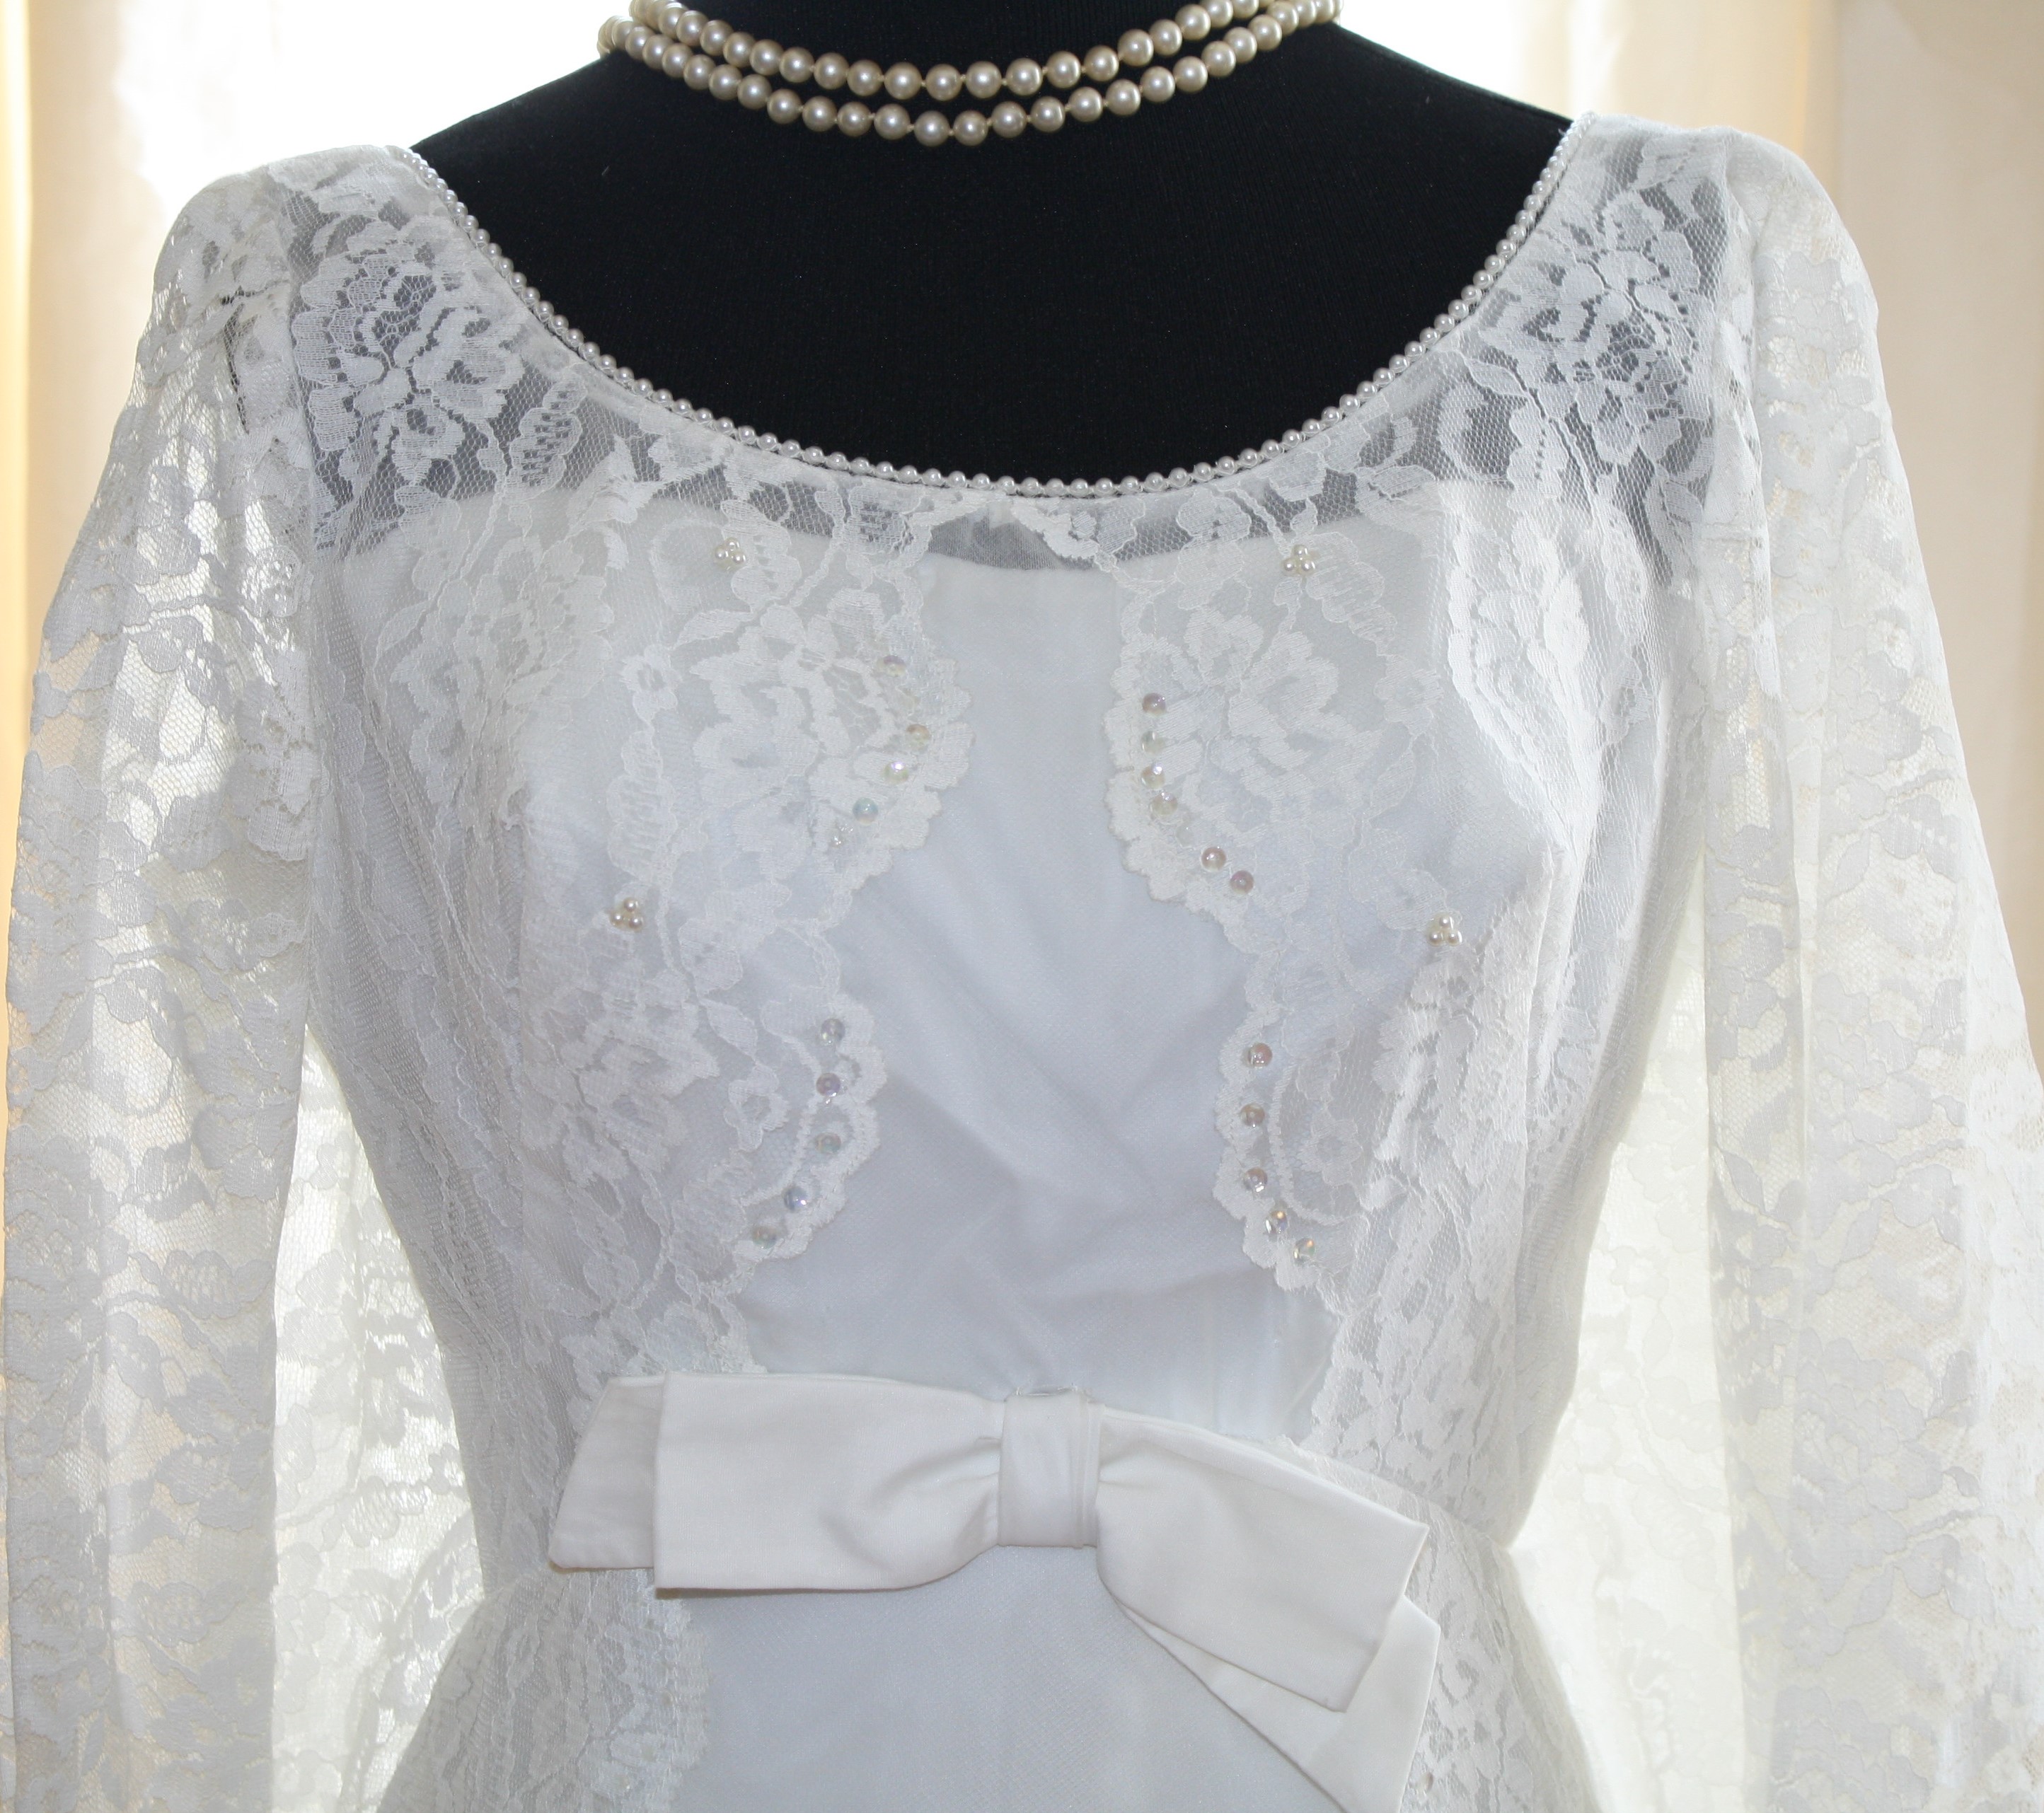 A Vintage Wedding Too's Bridal Gowns - 1950s to 1960s! - A Vintage ...